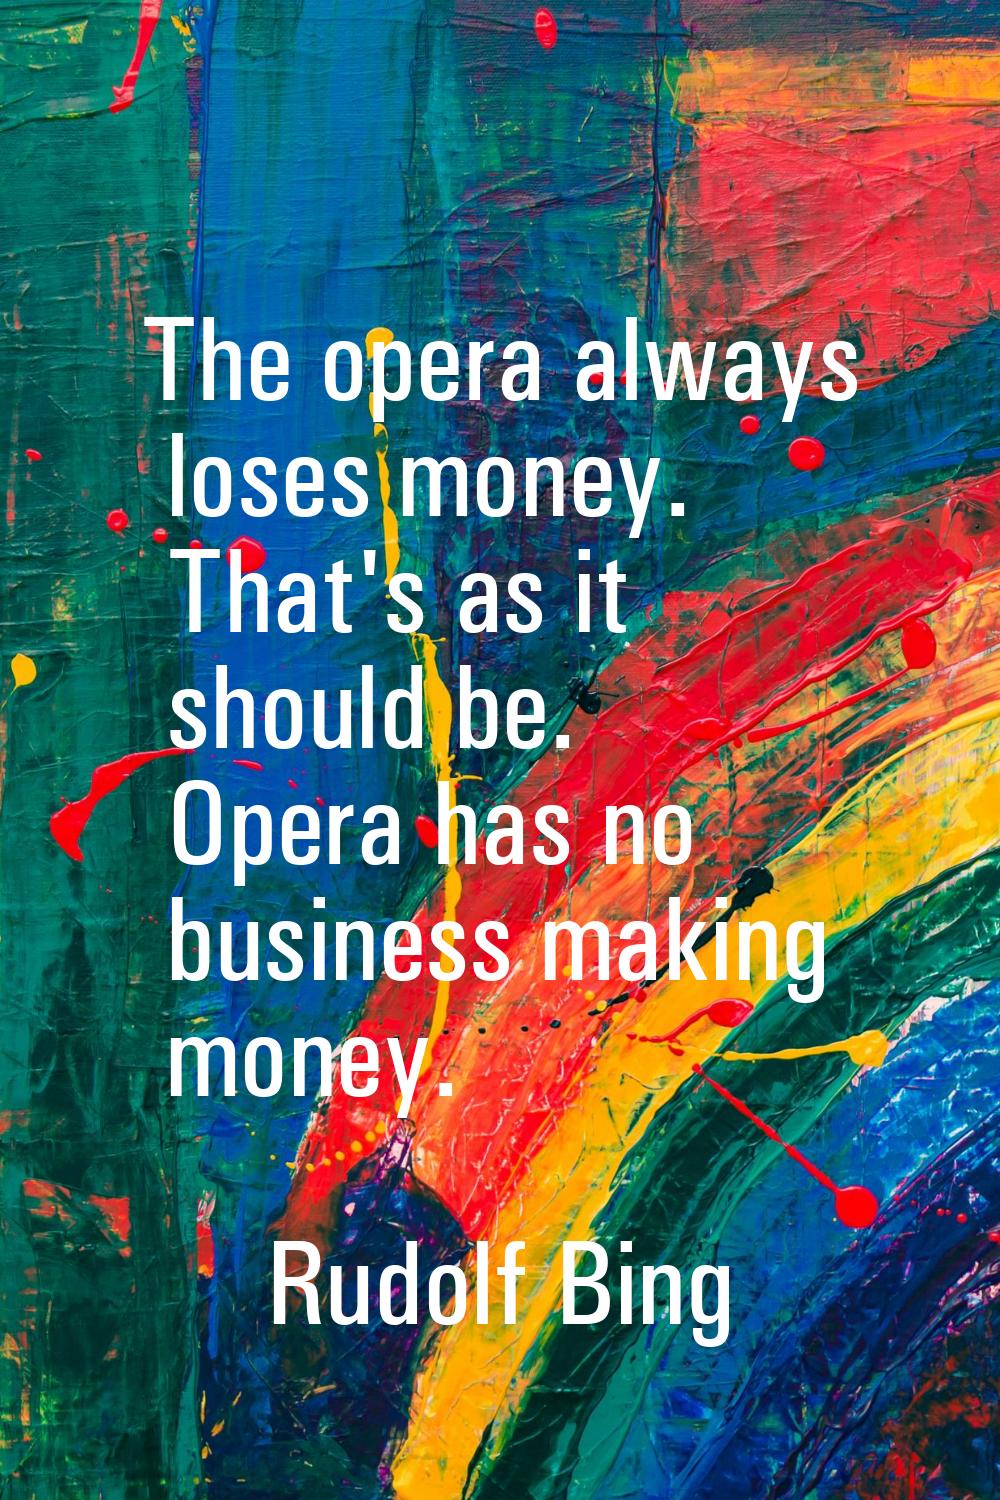 The opera always loses money. That's as it should be. Opera has no business making money.